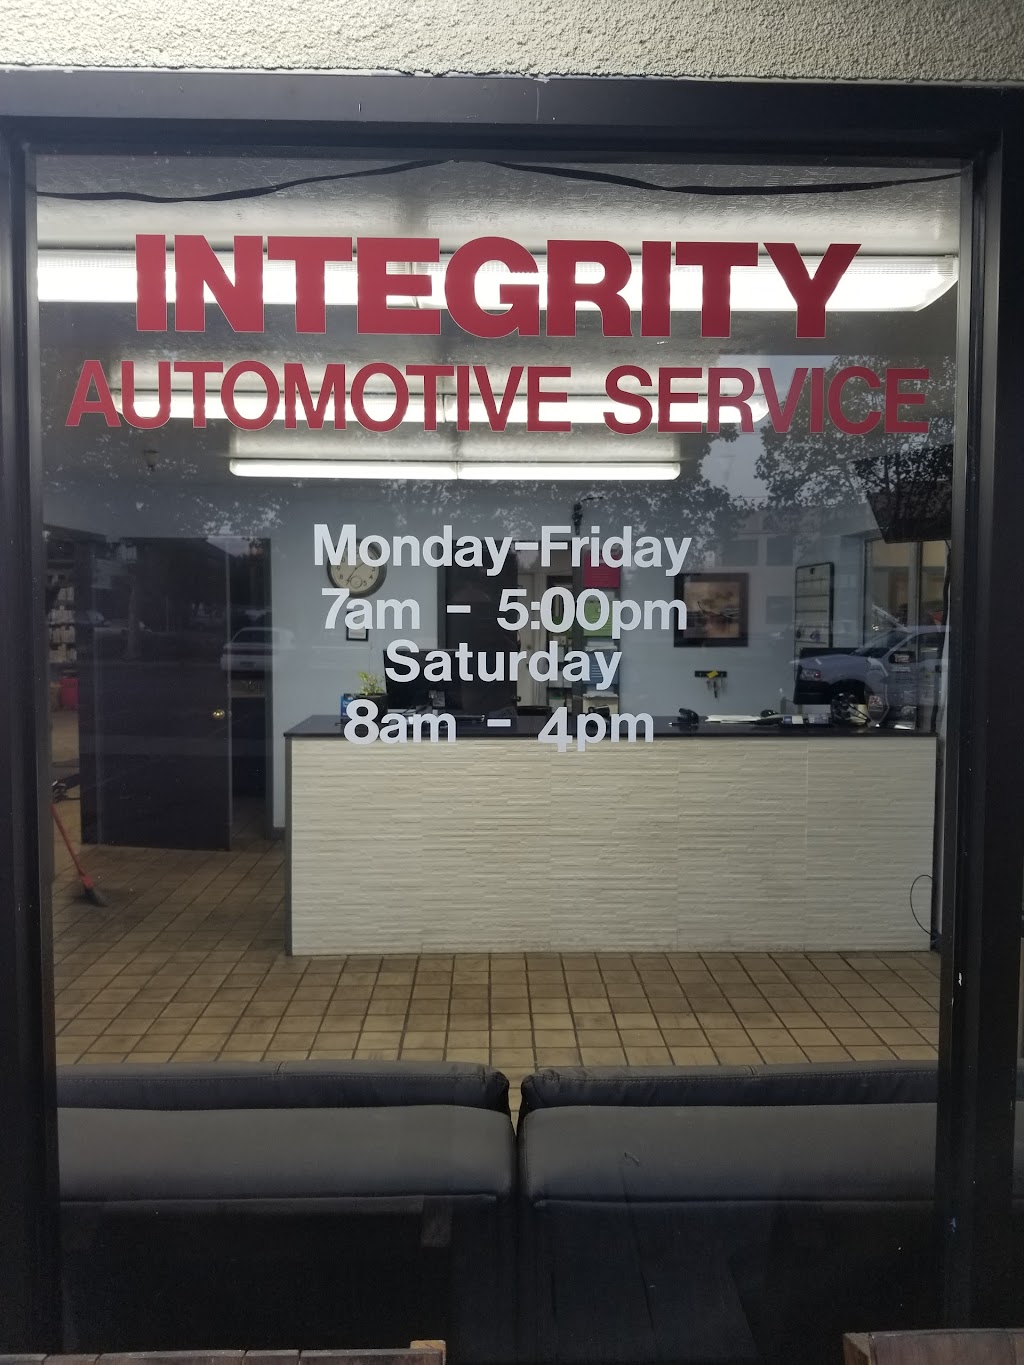 Integrity Automotive Service, Inc. | 107-A Whispering Pines Dr, Scotts Valley, CA 95066, USA | Phone: (831) 439-9631